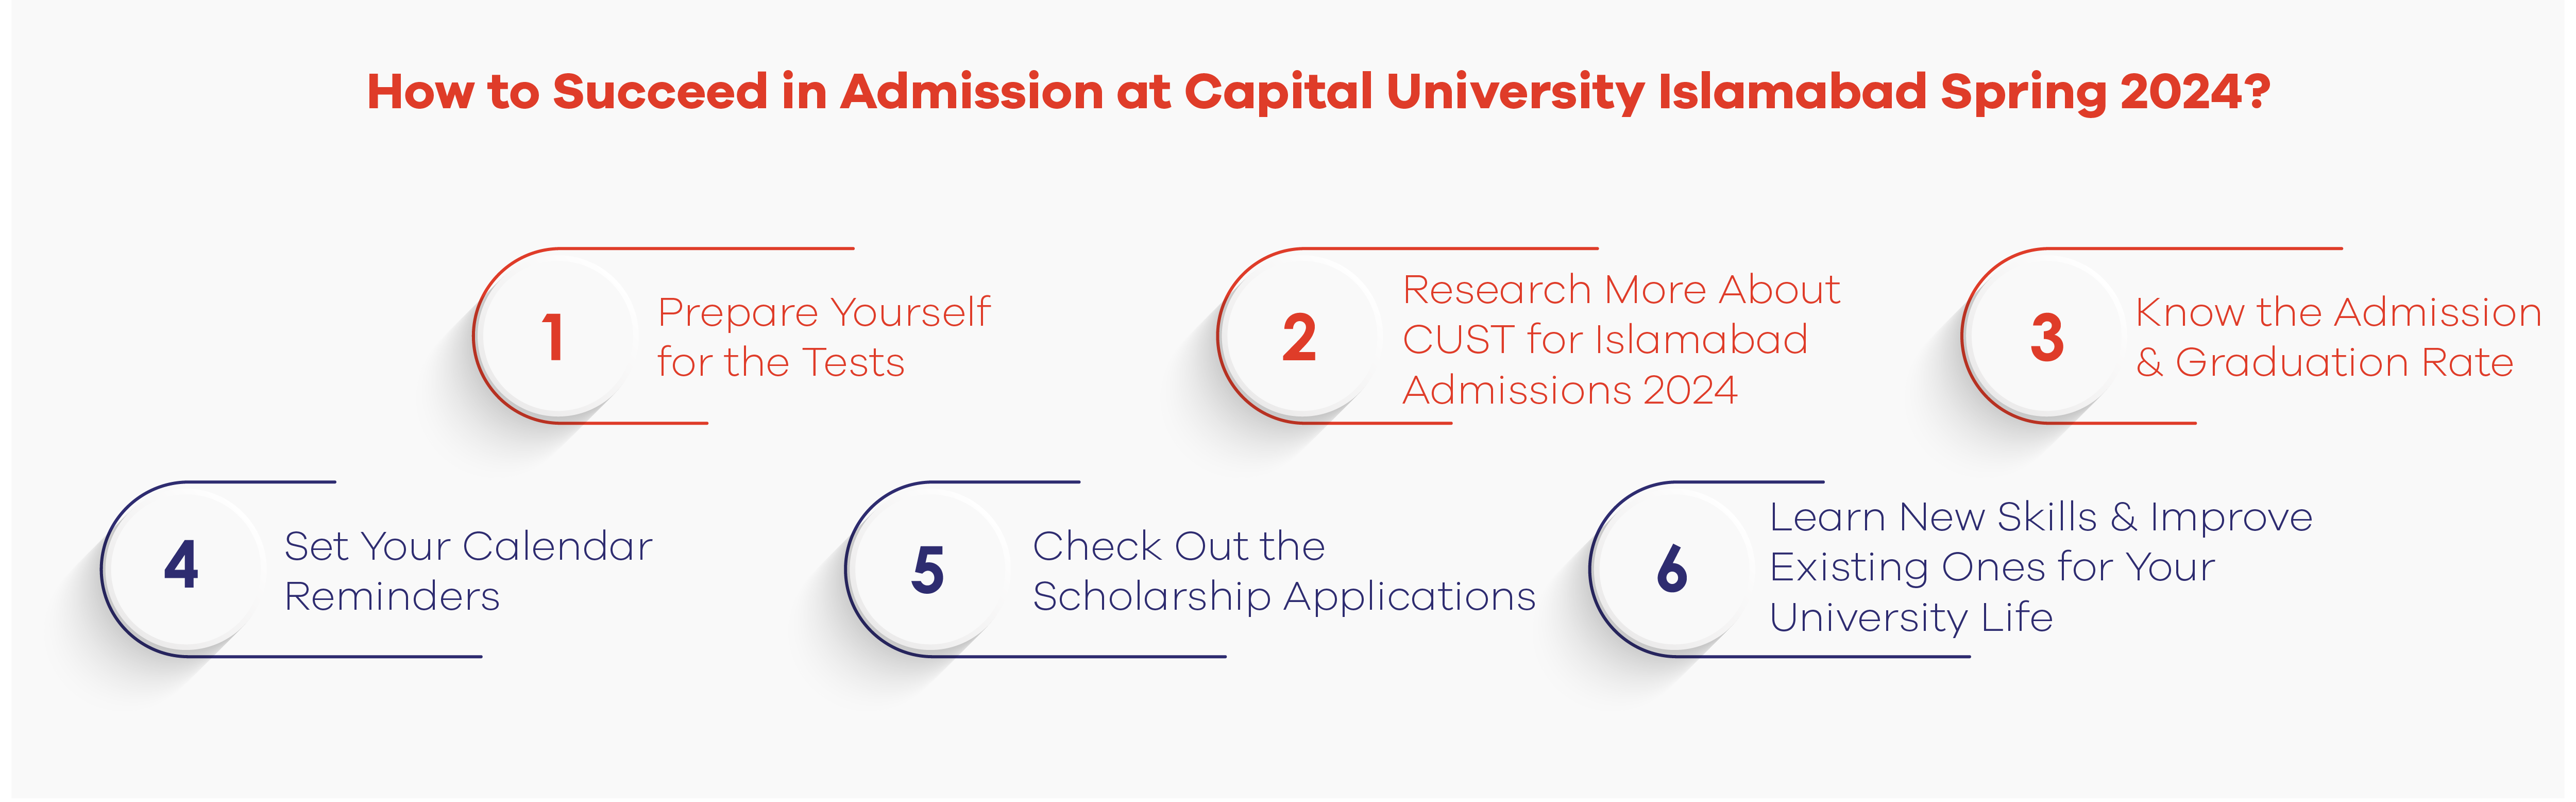 How to Succeed in Admission at Capital University Islamabad Spring 2024?